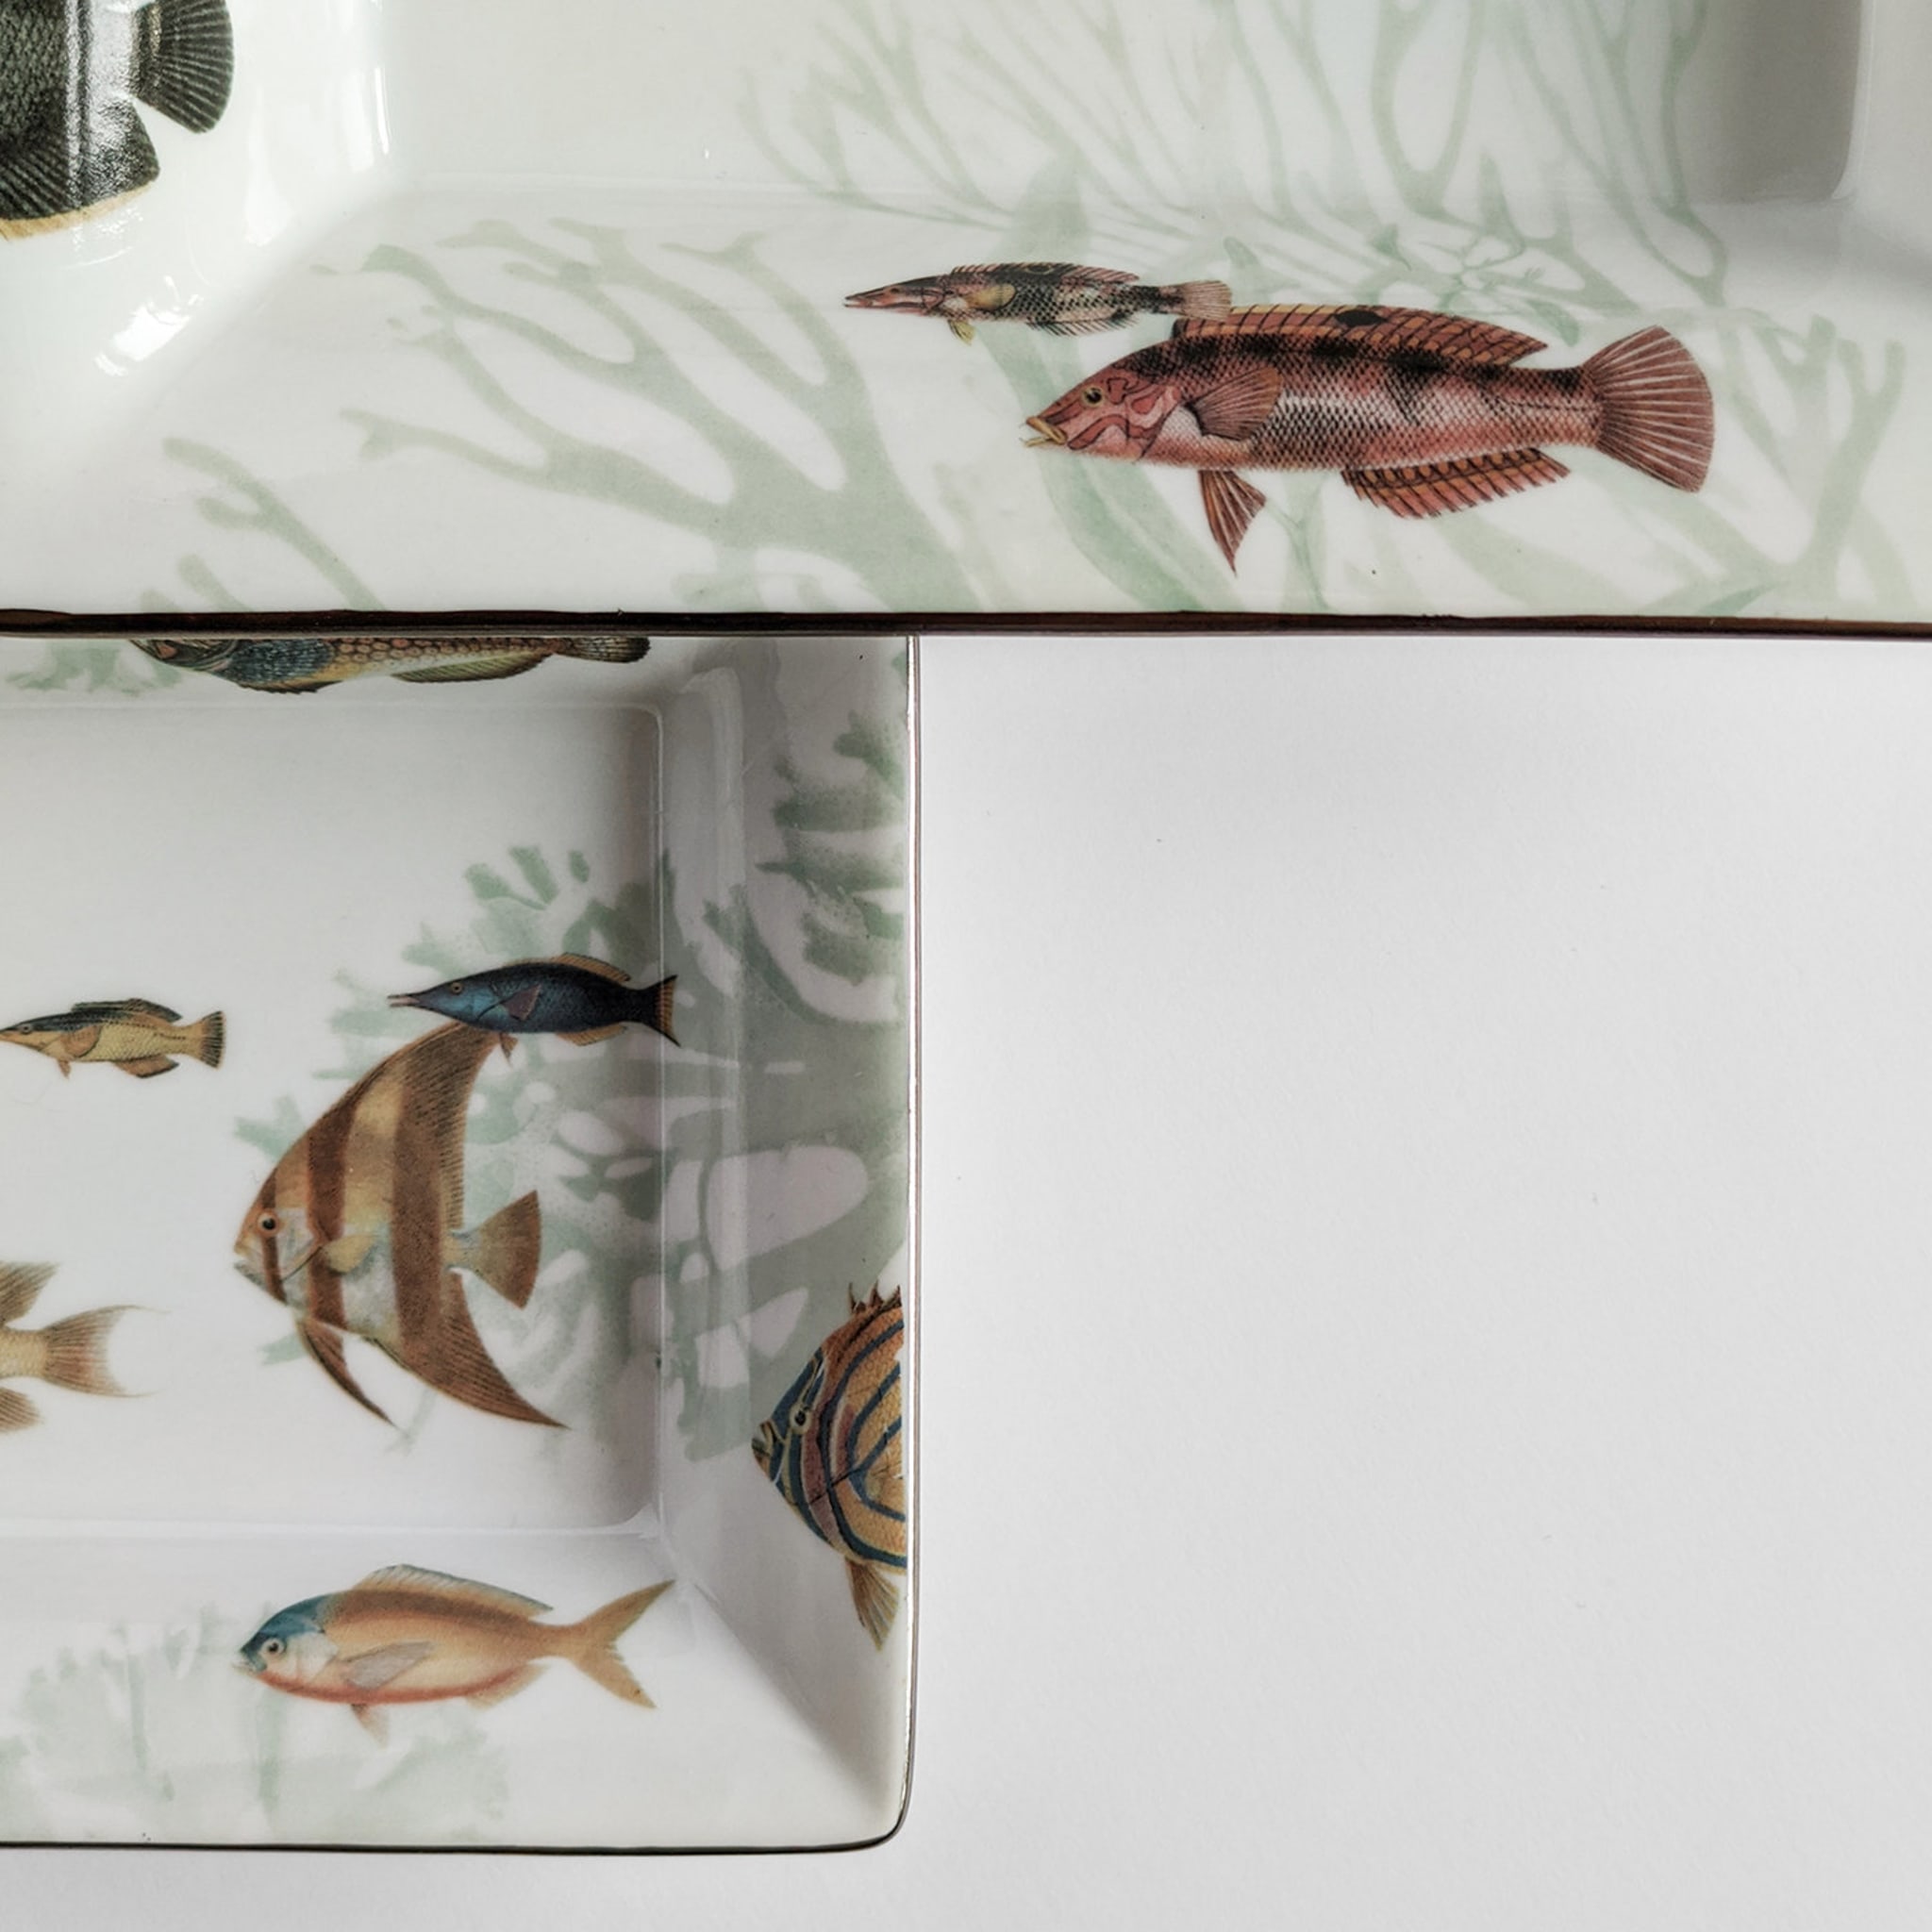 Amami Set Of Porcelain Ashtray And Vide-Poche With Tropical Fish - Alternative view 2